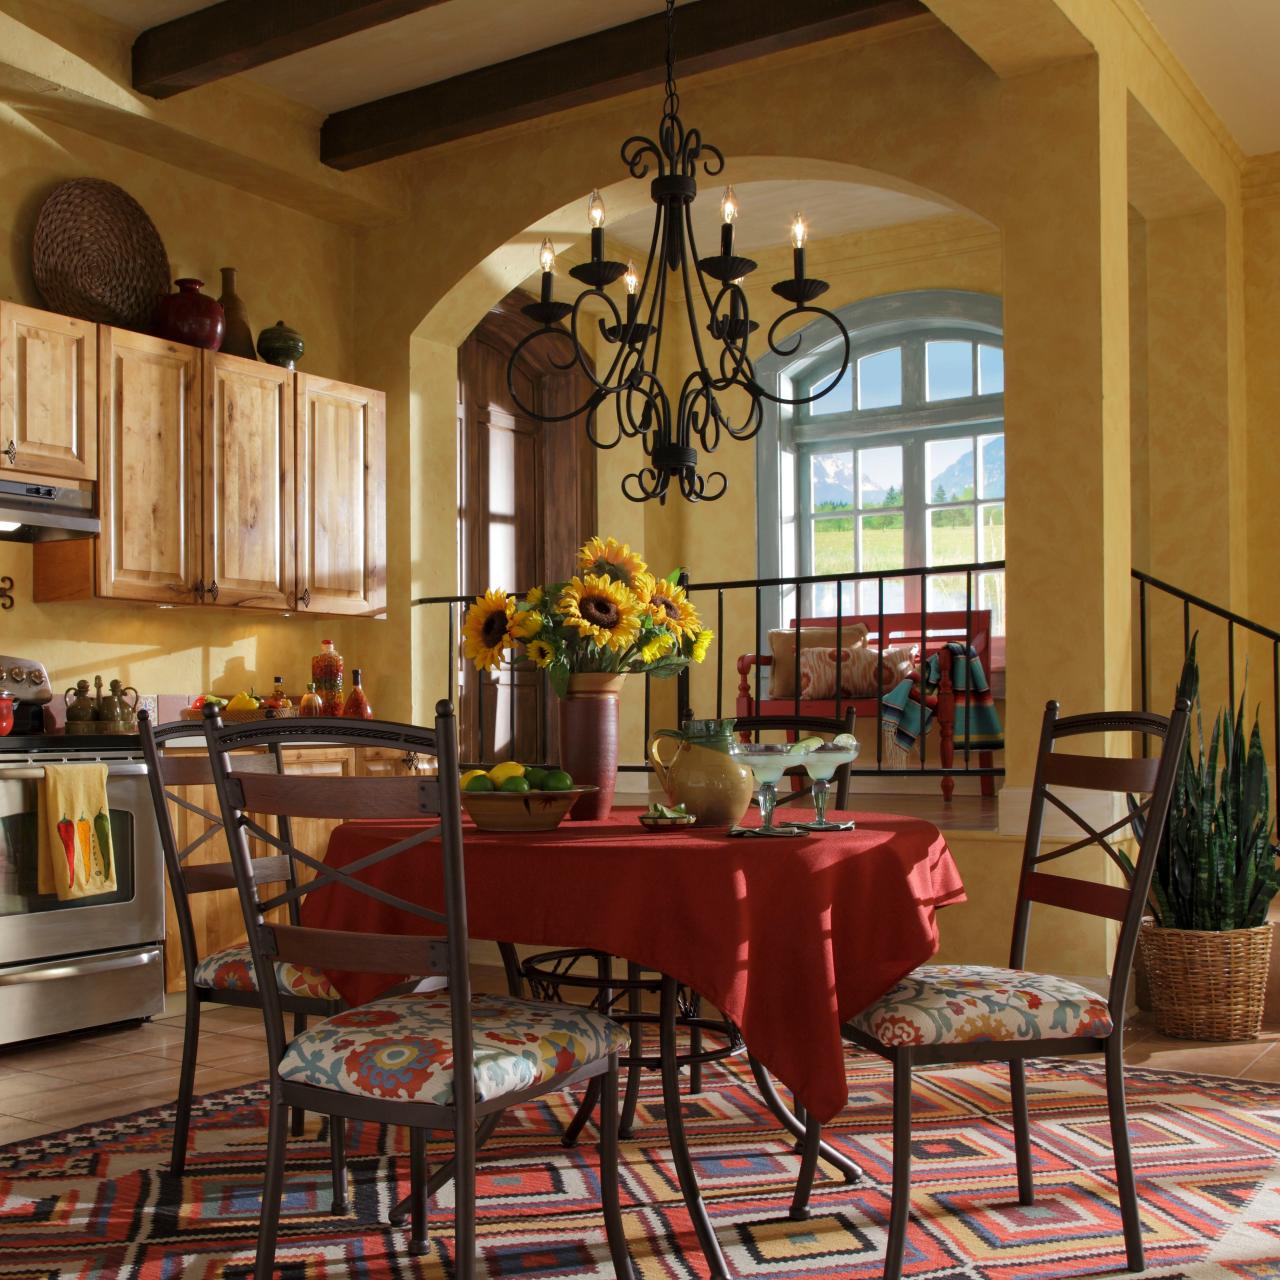 Top Kitchens of 2012  Mexican style kitchens, Mexican kitchen decor,  Mexican home decor